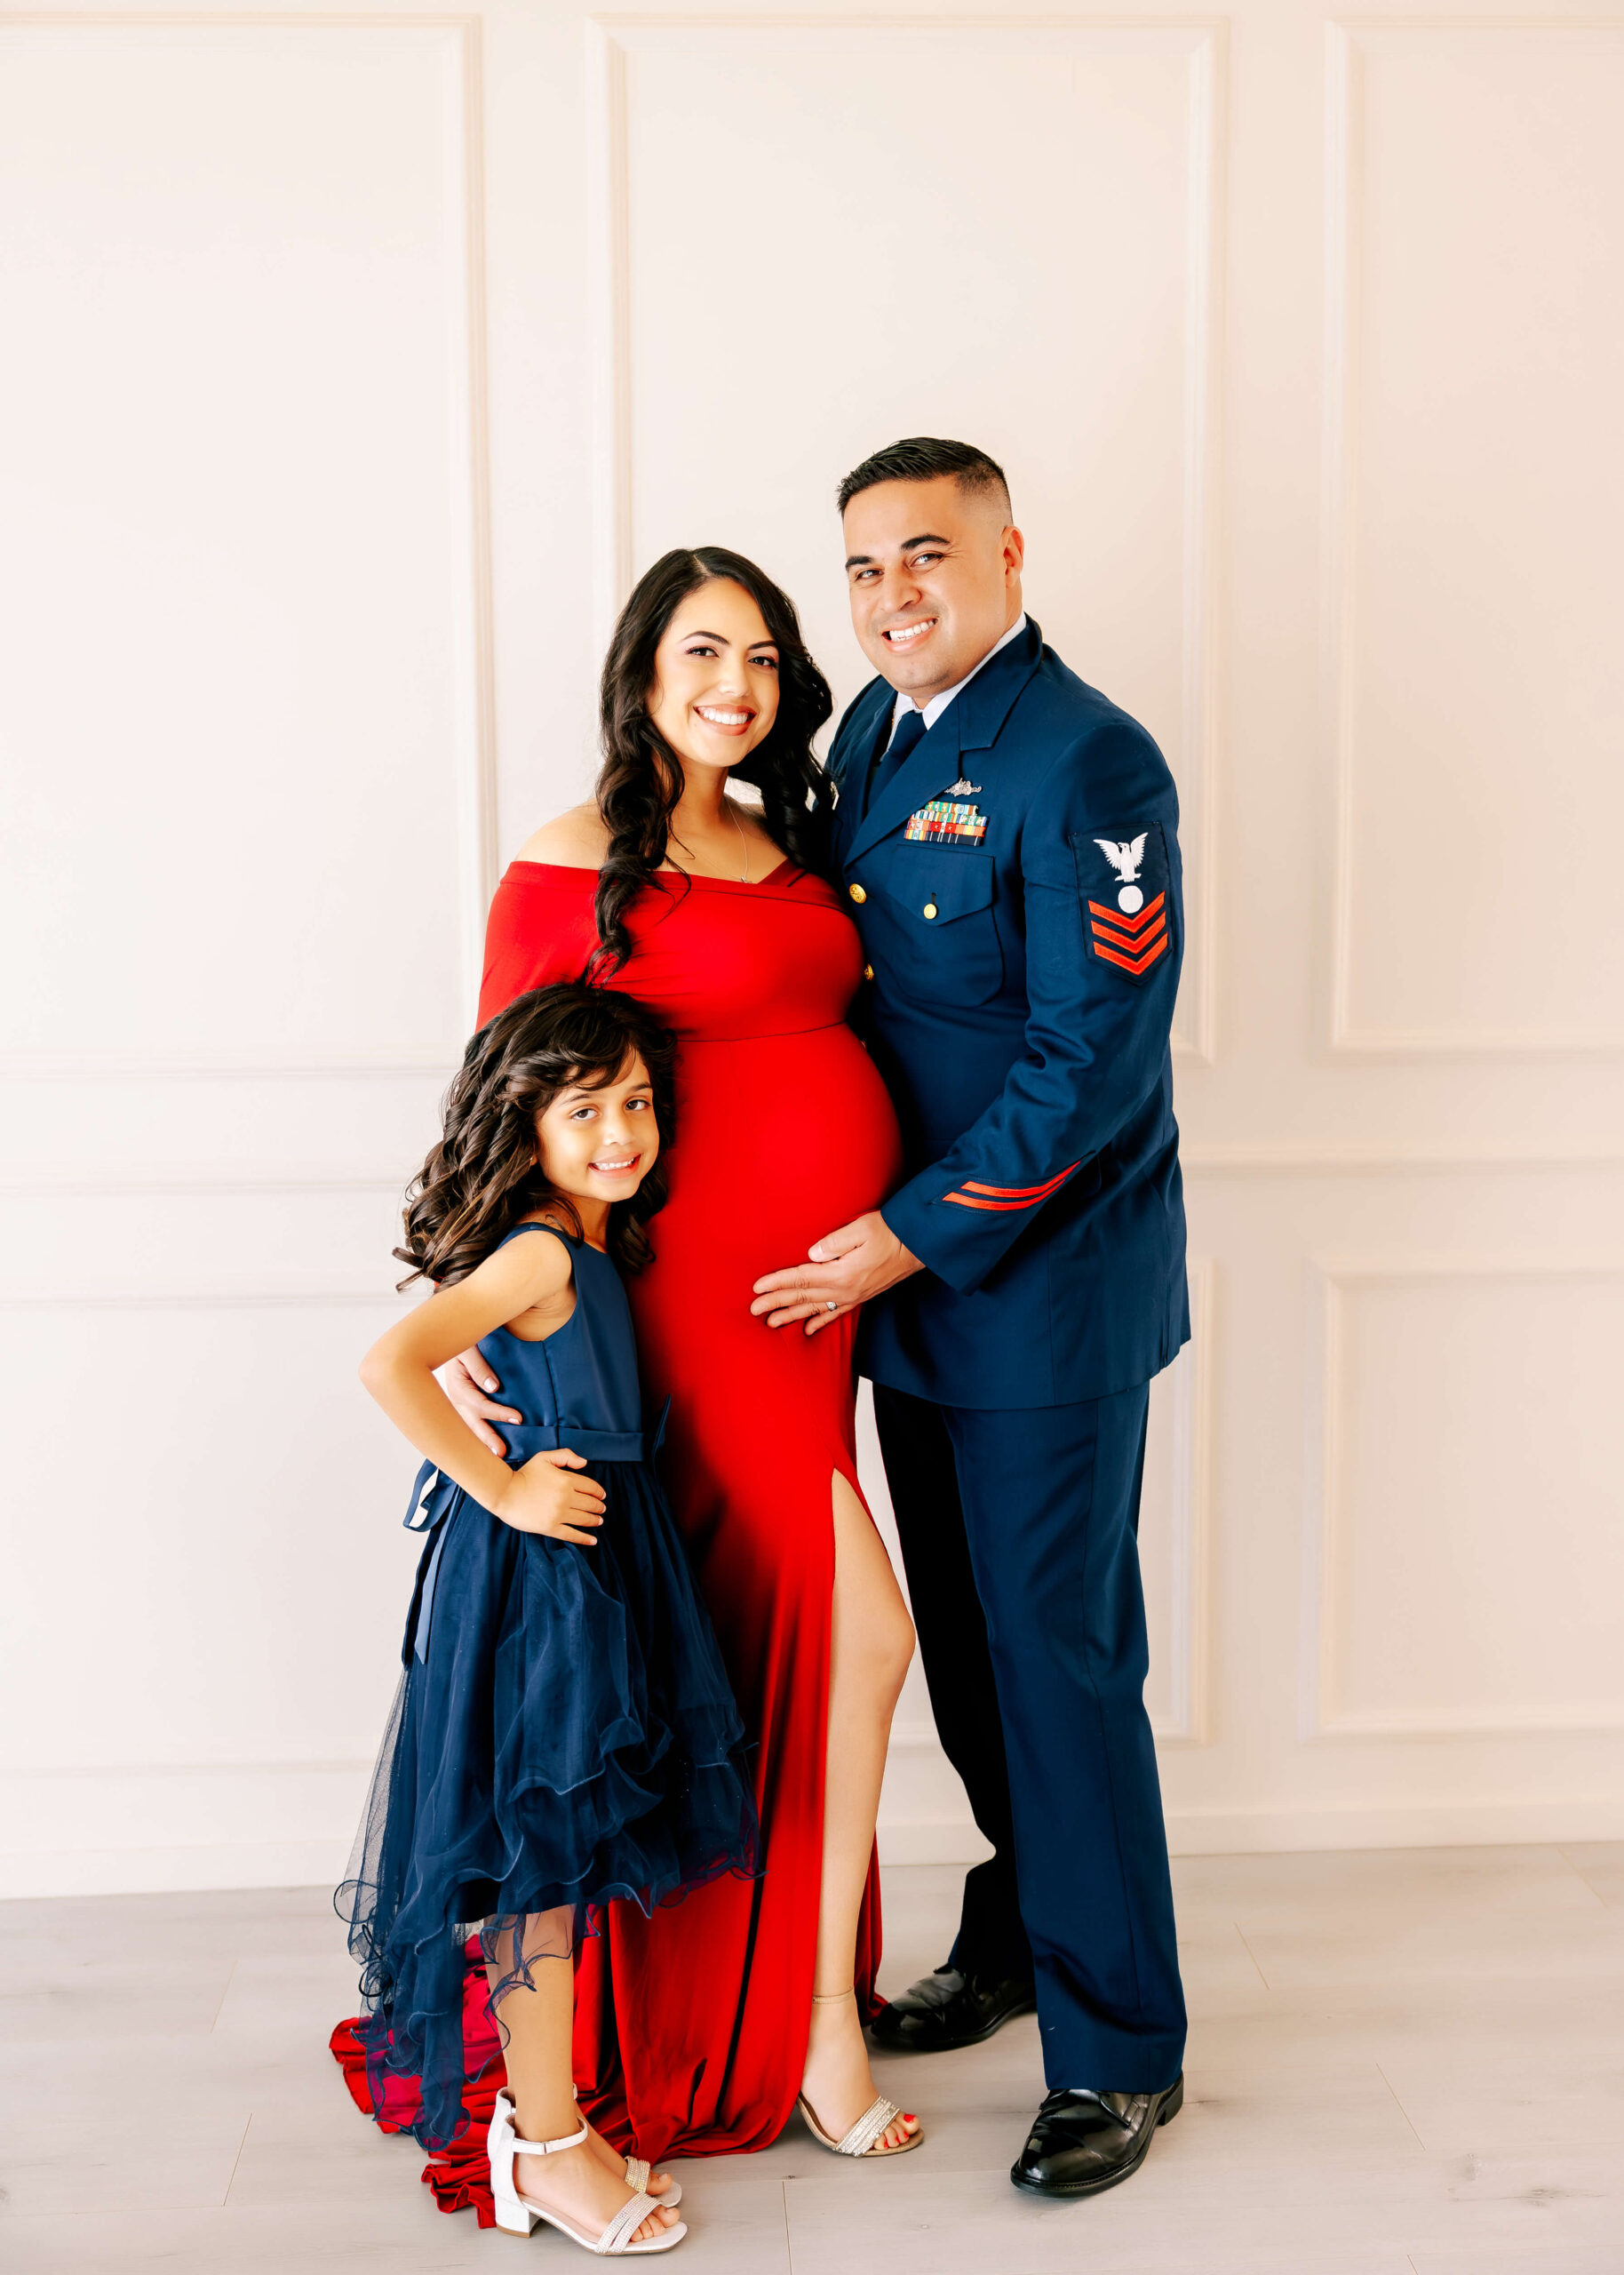 Military family expecting 2nd child posed together in Orange County, CA studio by Ashley Nicole Photography.